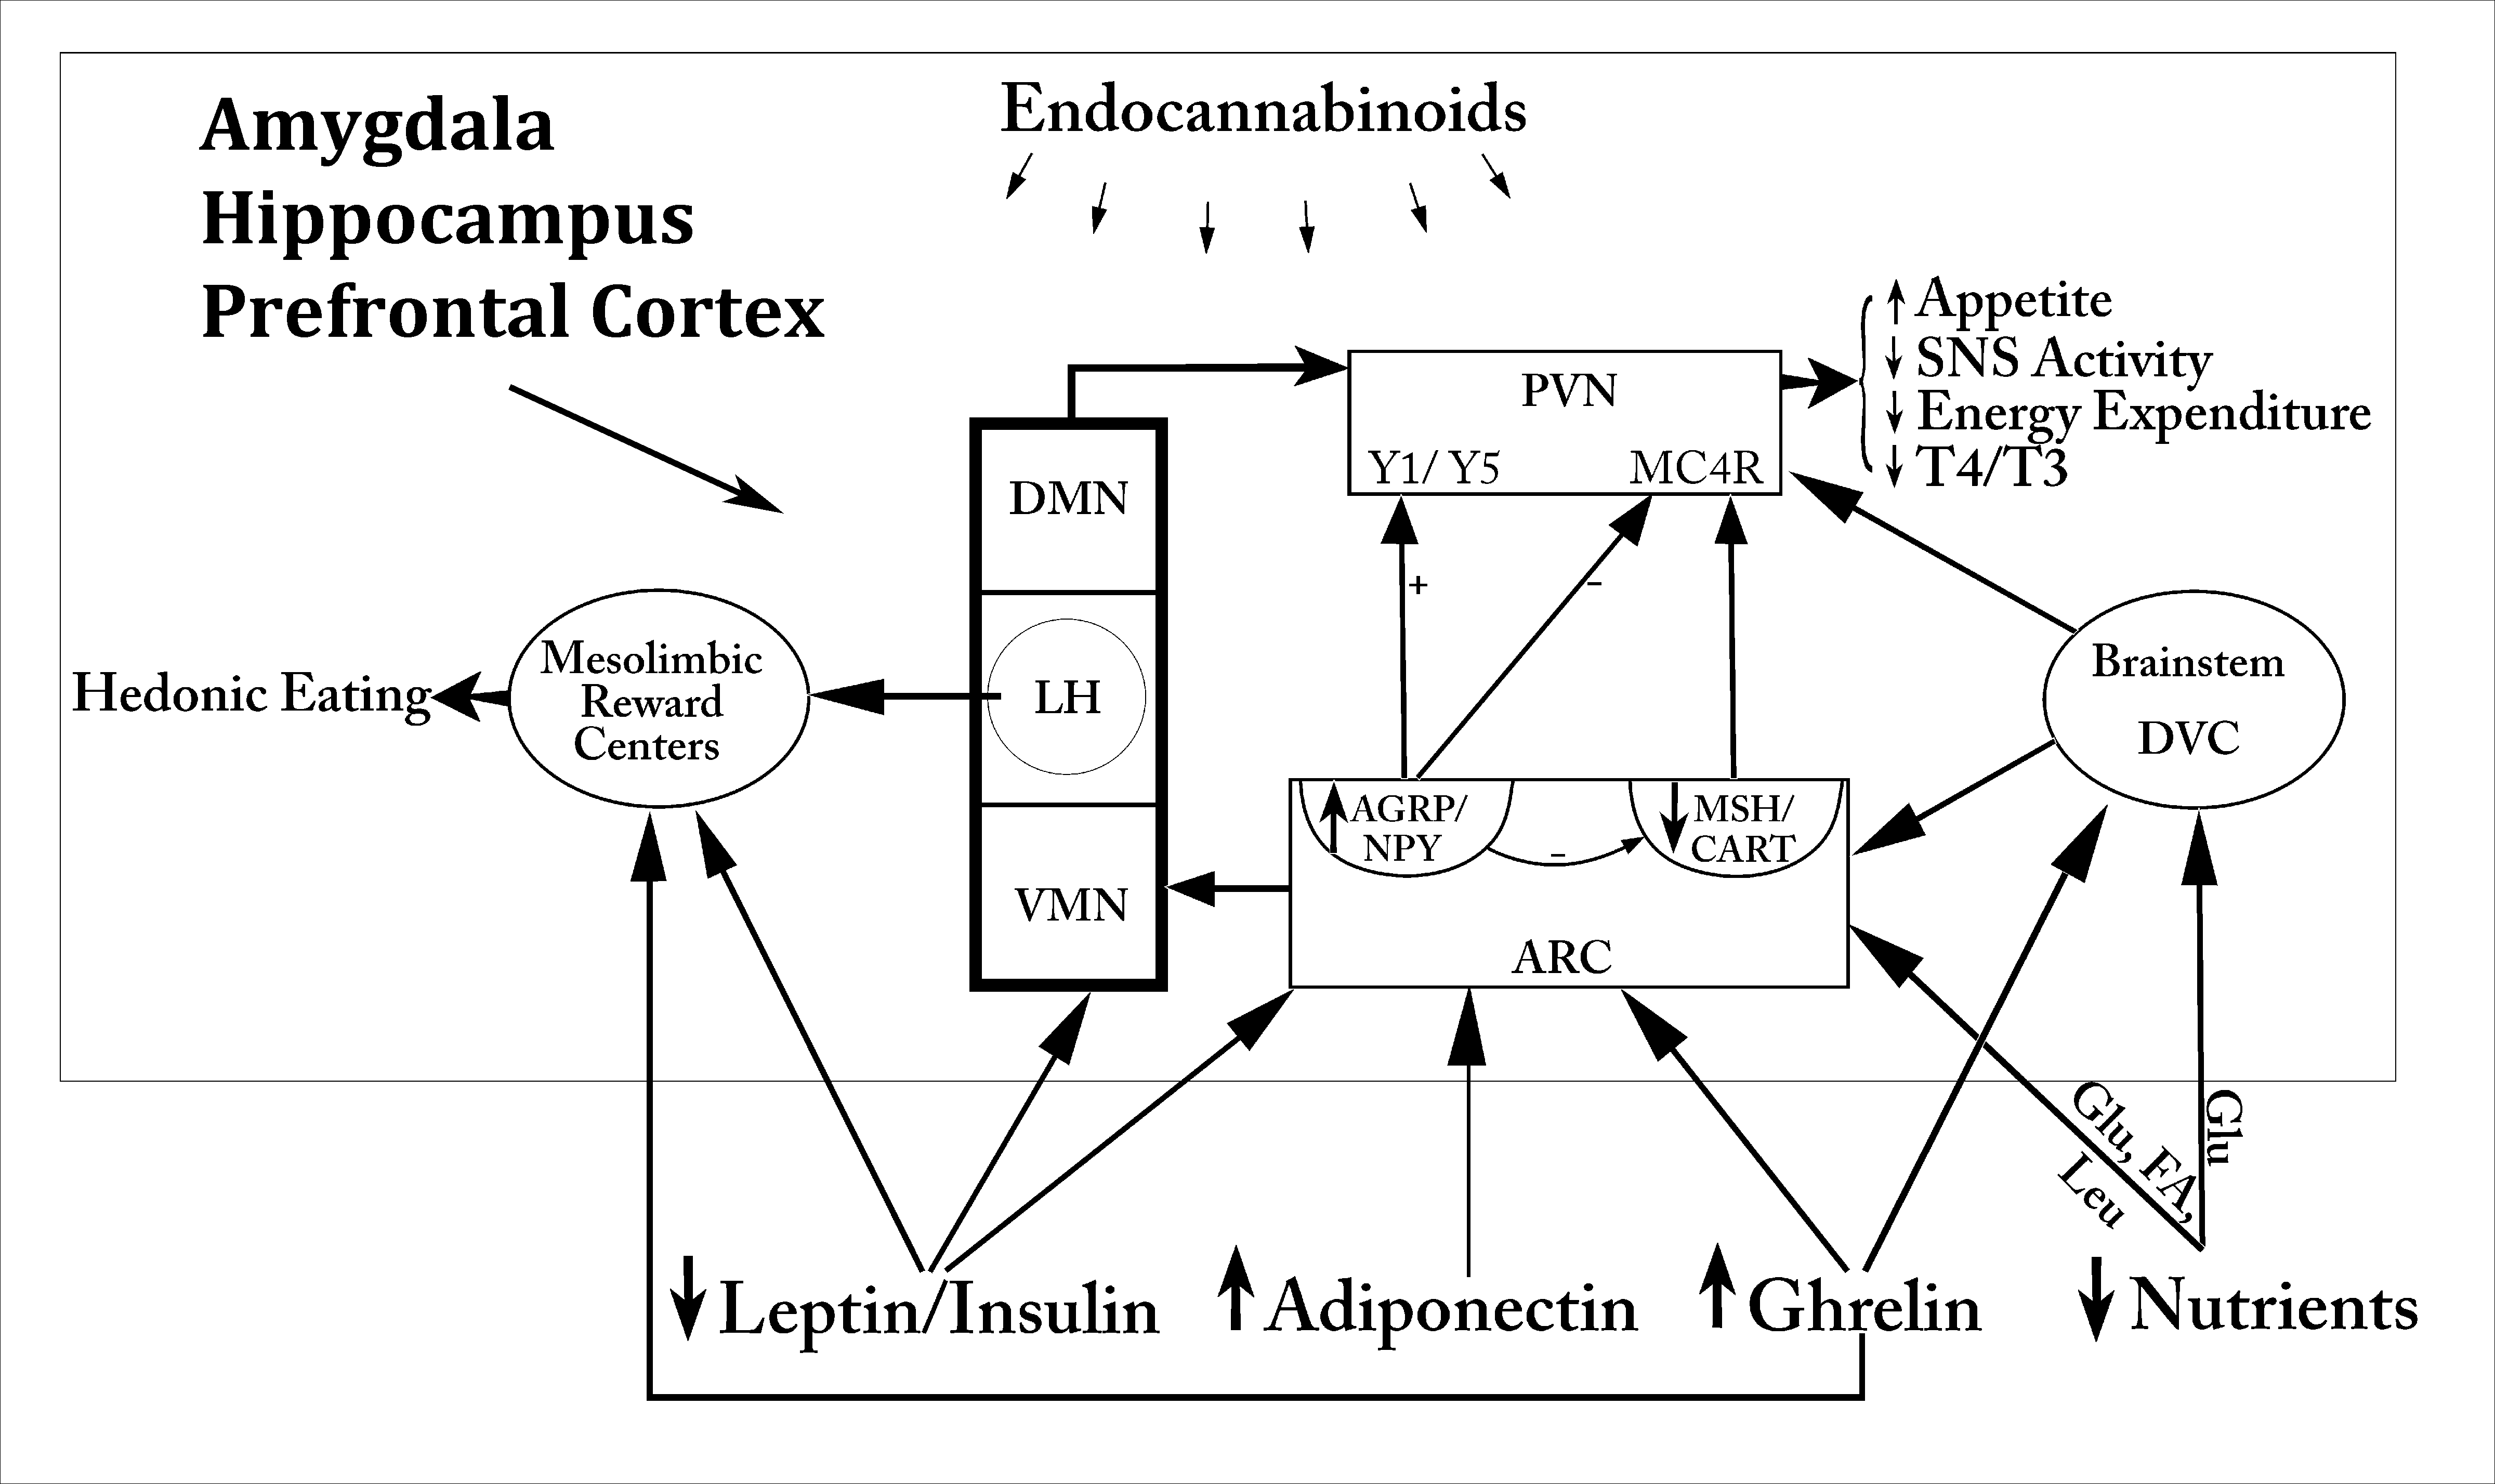 Fig. 37. Simplified schematic representation of some of the regulatory factors and pathways involved in the regulation of appetite and satiety. Circulating factors derived from fat, pancreas, liver and the gastrointestinal tract converge on the hypothalamus and/or brainstem to orchestrate a series of responses that promote increased appetite, decreased energy expenditure, activation of mesolimbic reward centers and reduce circulating thyroid hormone levels. Note similarities of target regions in the brain by several regulatory factors, particularly for AGRP/NPY and -MSH/CART neurons in the hypothalamic arcuate nucleus. The endocannabinoid system exerts regulatory effects on neurons in multiple regions of the brain. Other regions of the brain including the amygdala, hippocampus, and prefrontal cortex also have important roles in the regulation of eating. ARC= arcuate nucleus, DMN= dorsomedial nucleus, DVC= dorsal vagal complex, LH= lateral hypothalamus, PVN= paraventricular nucleus, SNS=sympathetic nervous system, VMN= ventromedial nucleus.